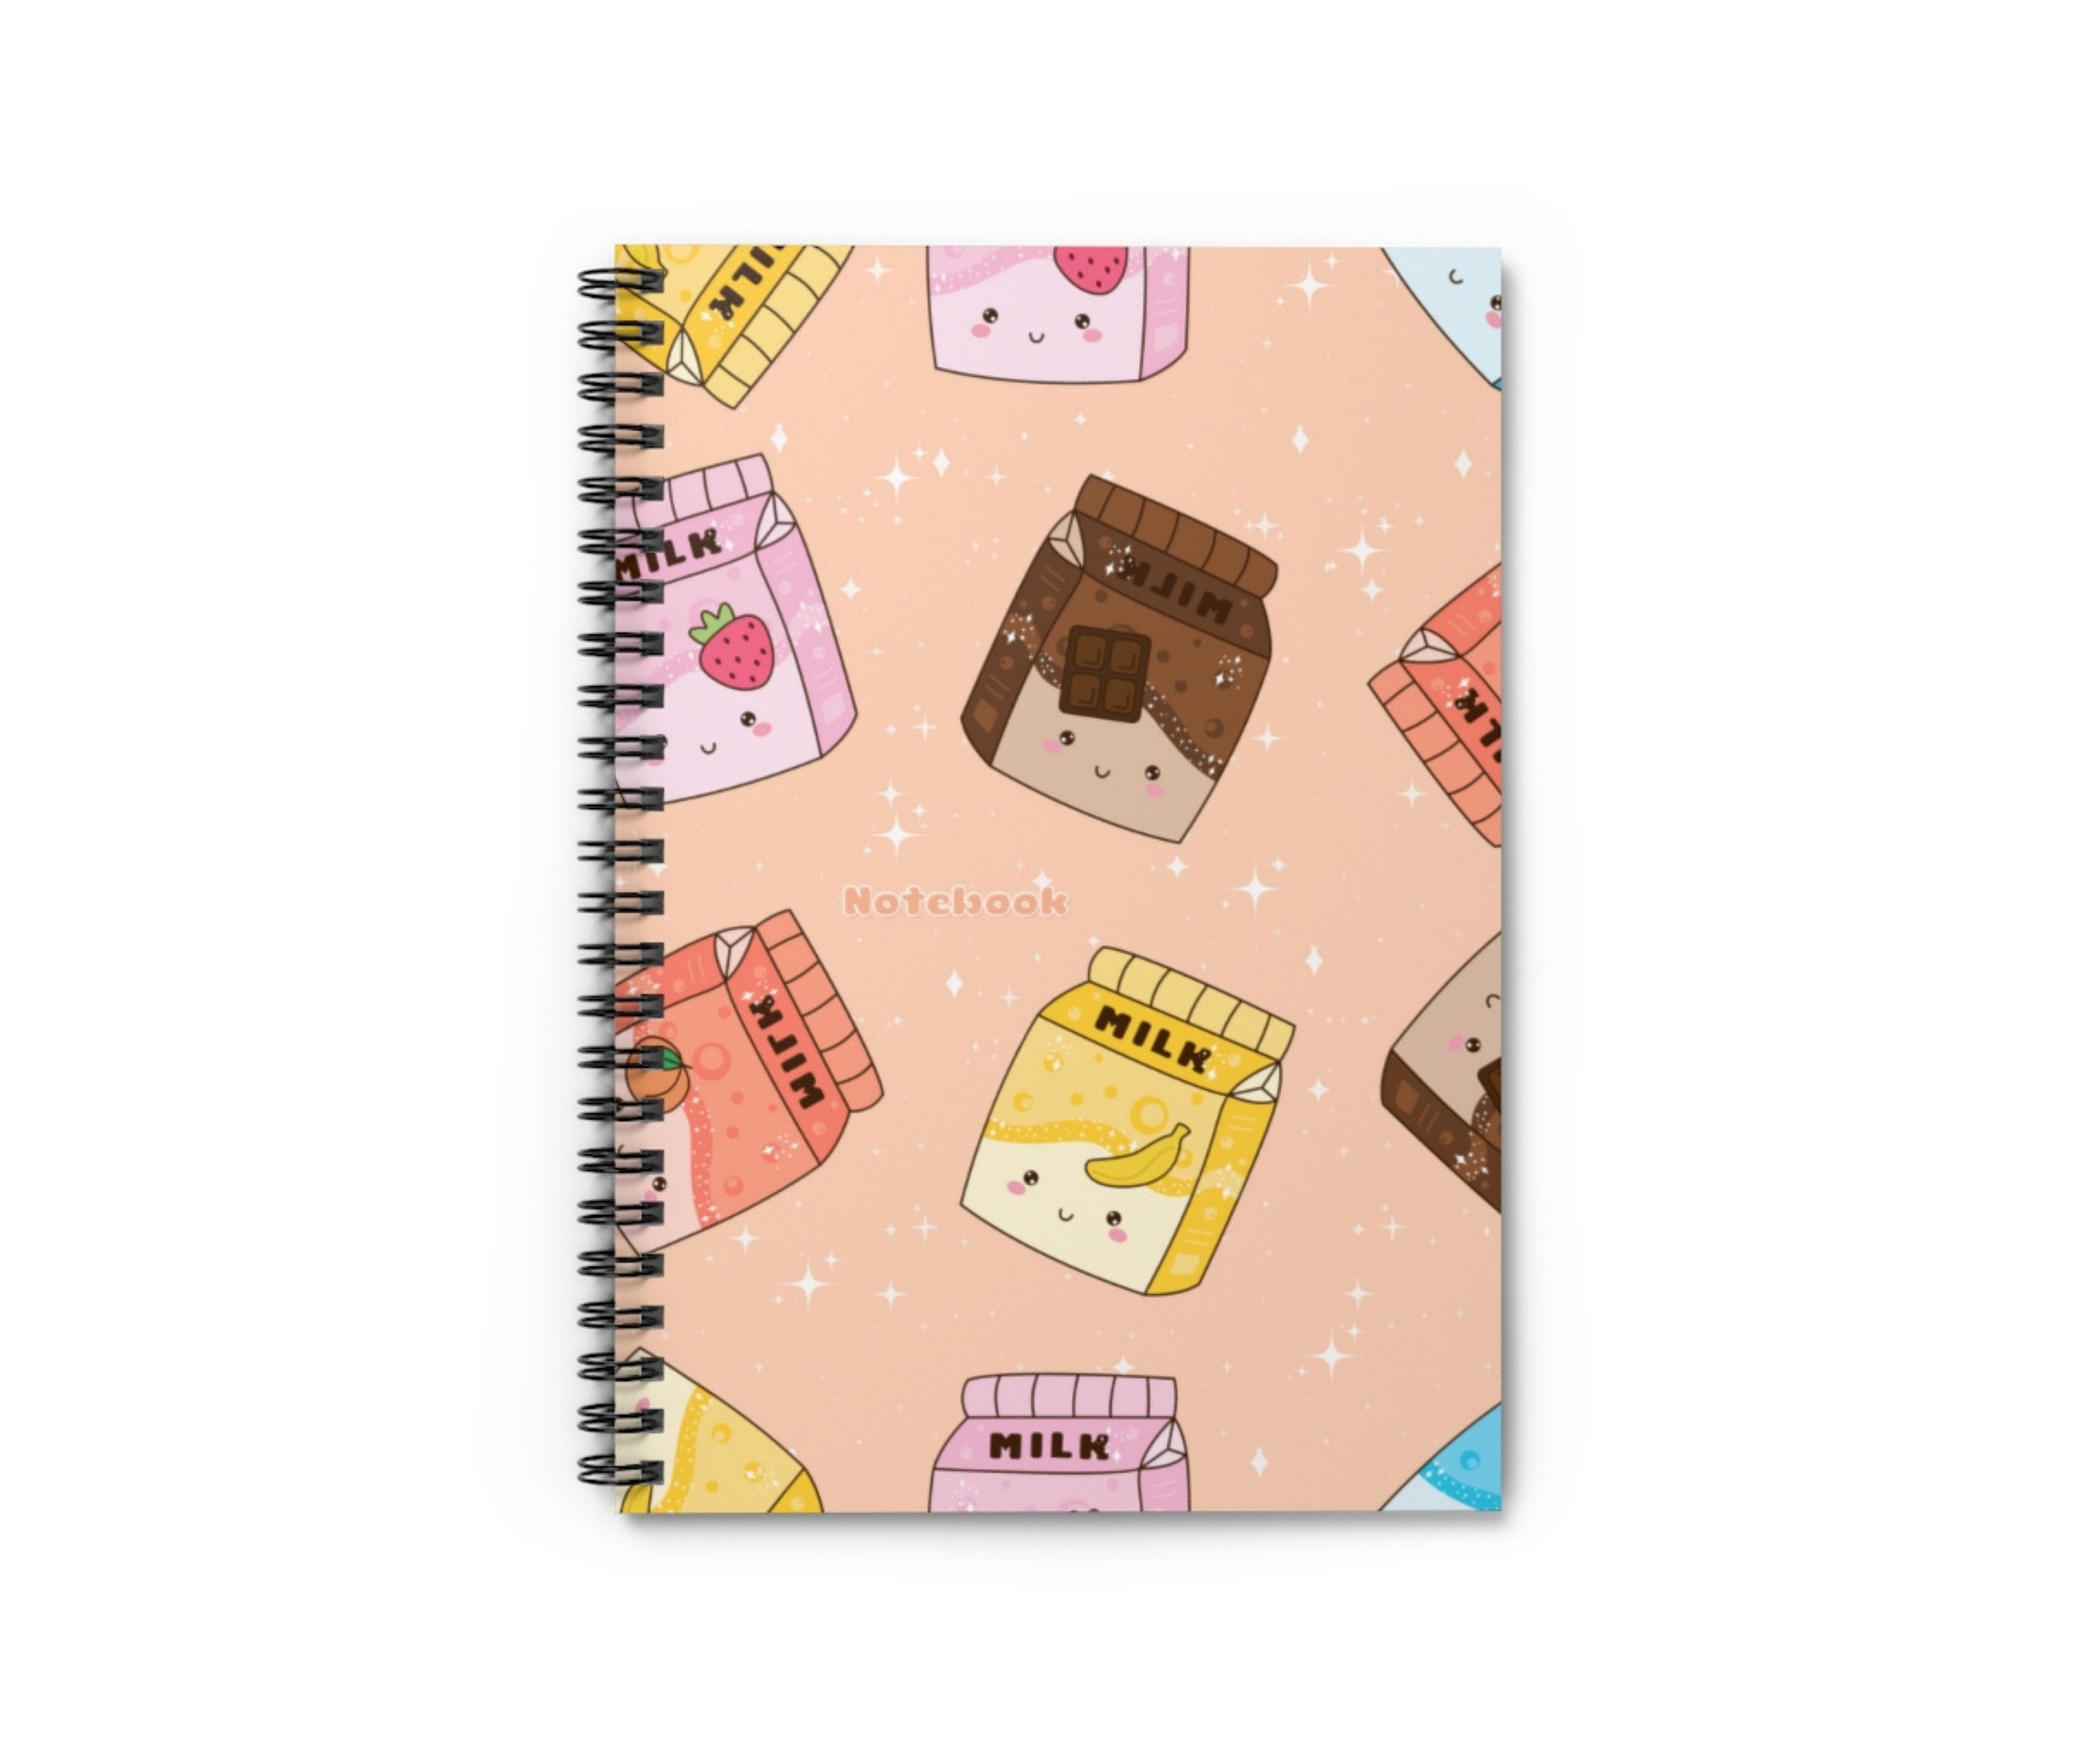 Kawaii College Ruled Composition Notebook: Pink Cute Kawaii Themed Japanese School Supplies Lined Paper for Girls to Write in at School Gift Idea